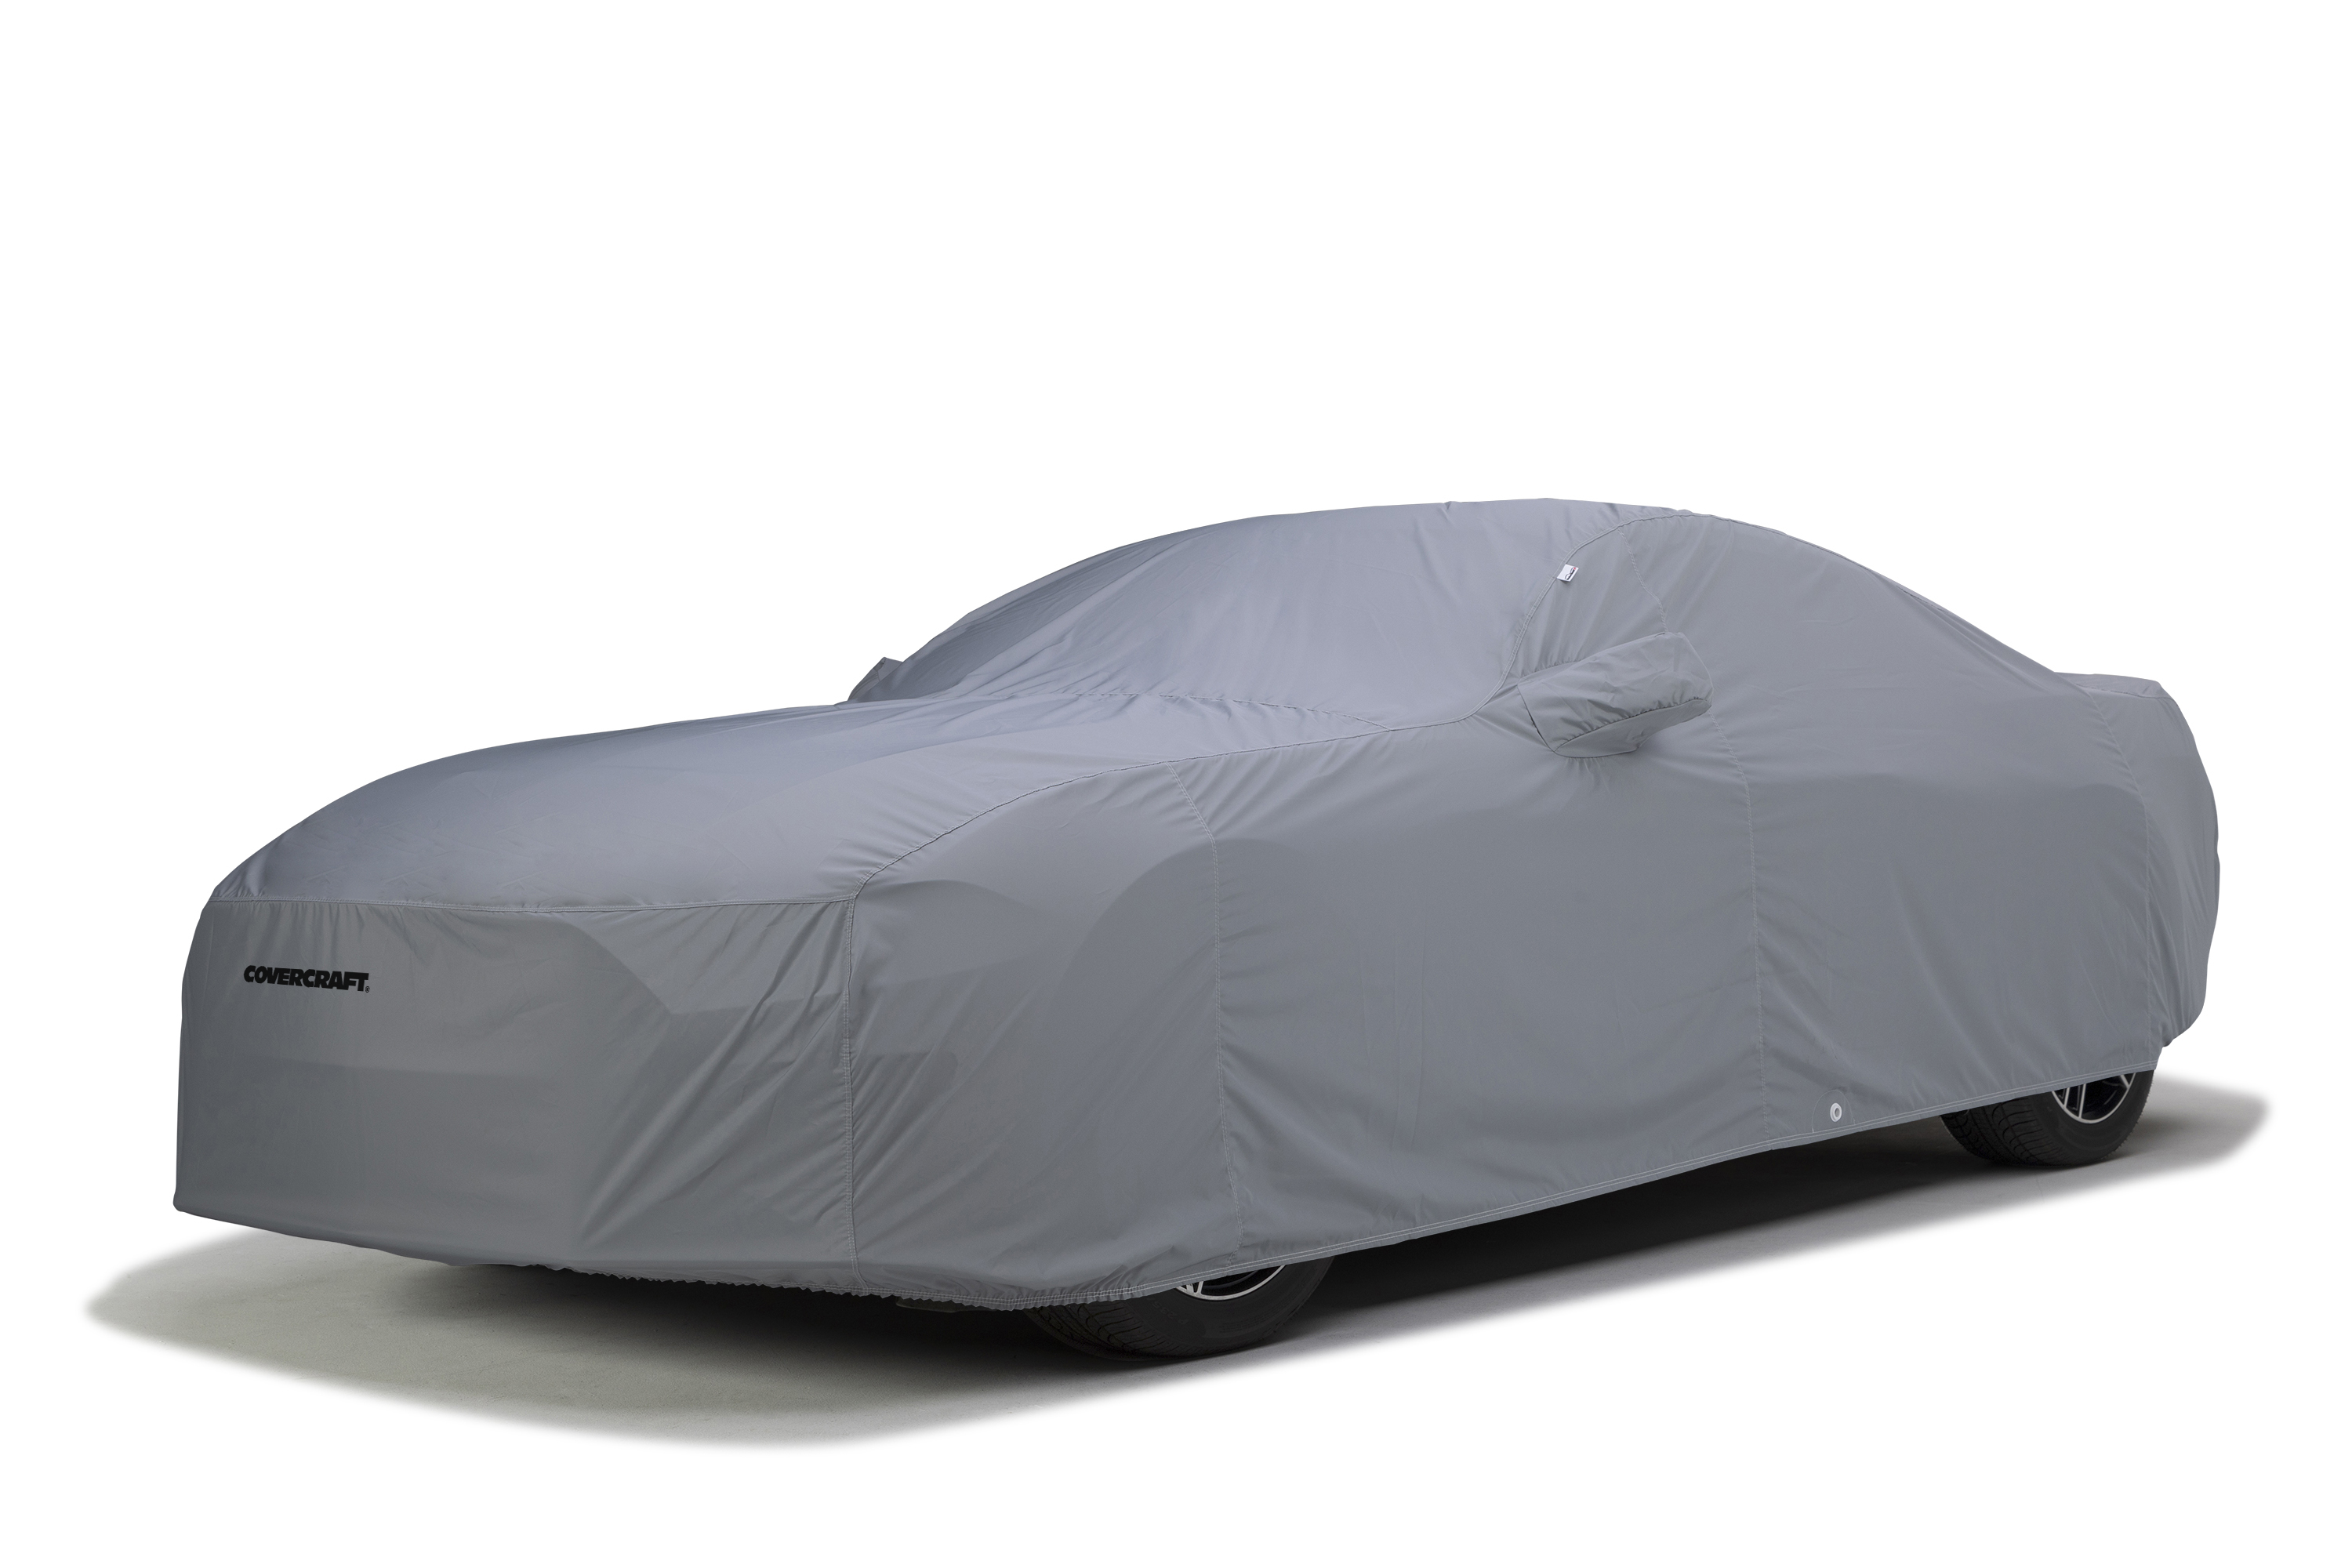 Fourth Generation 1999-2004 Ford Mustang WeatherShield HP Car Cover, Saleen  W/2 Mirror Pockets Gray Covercraft